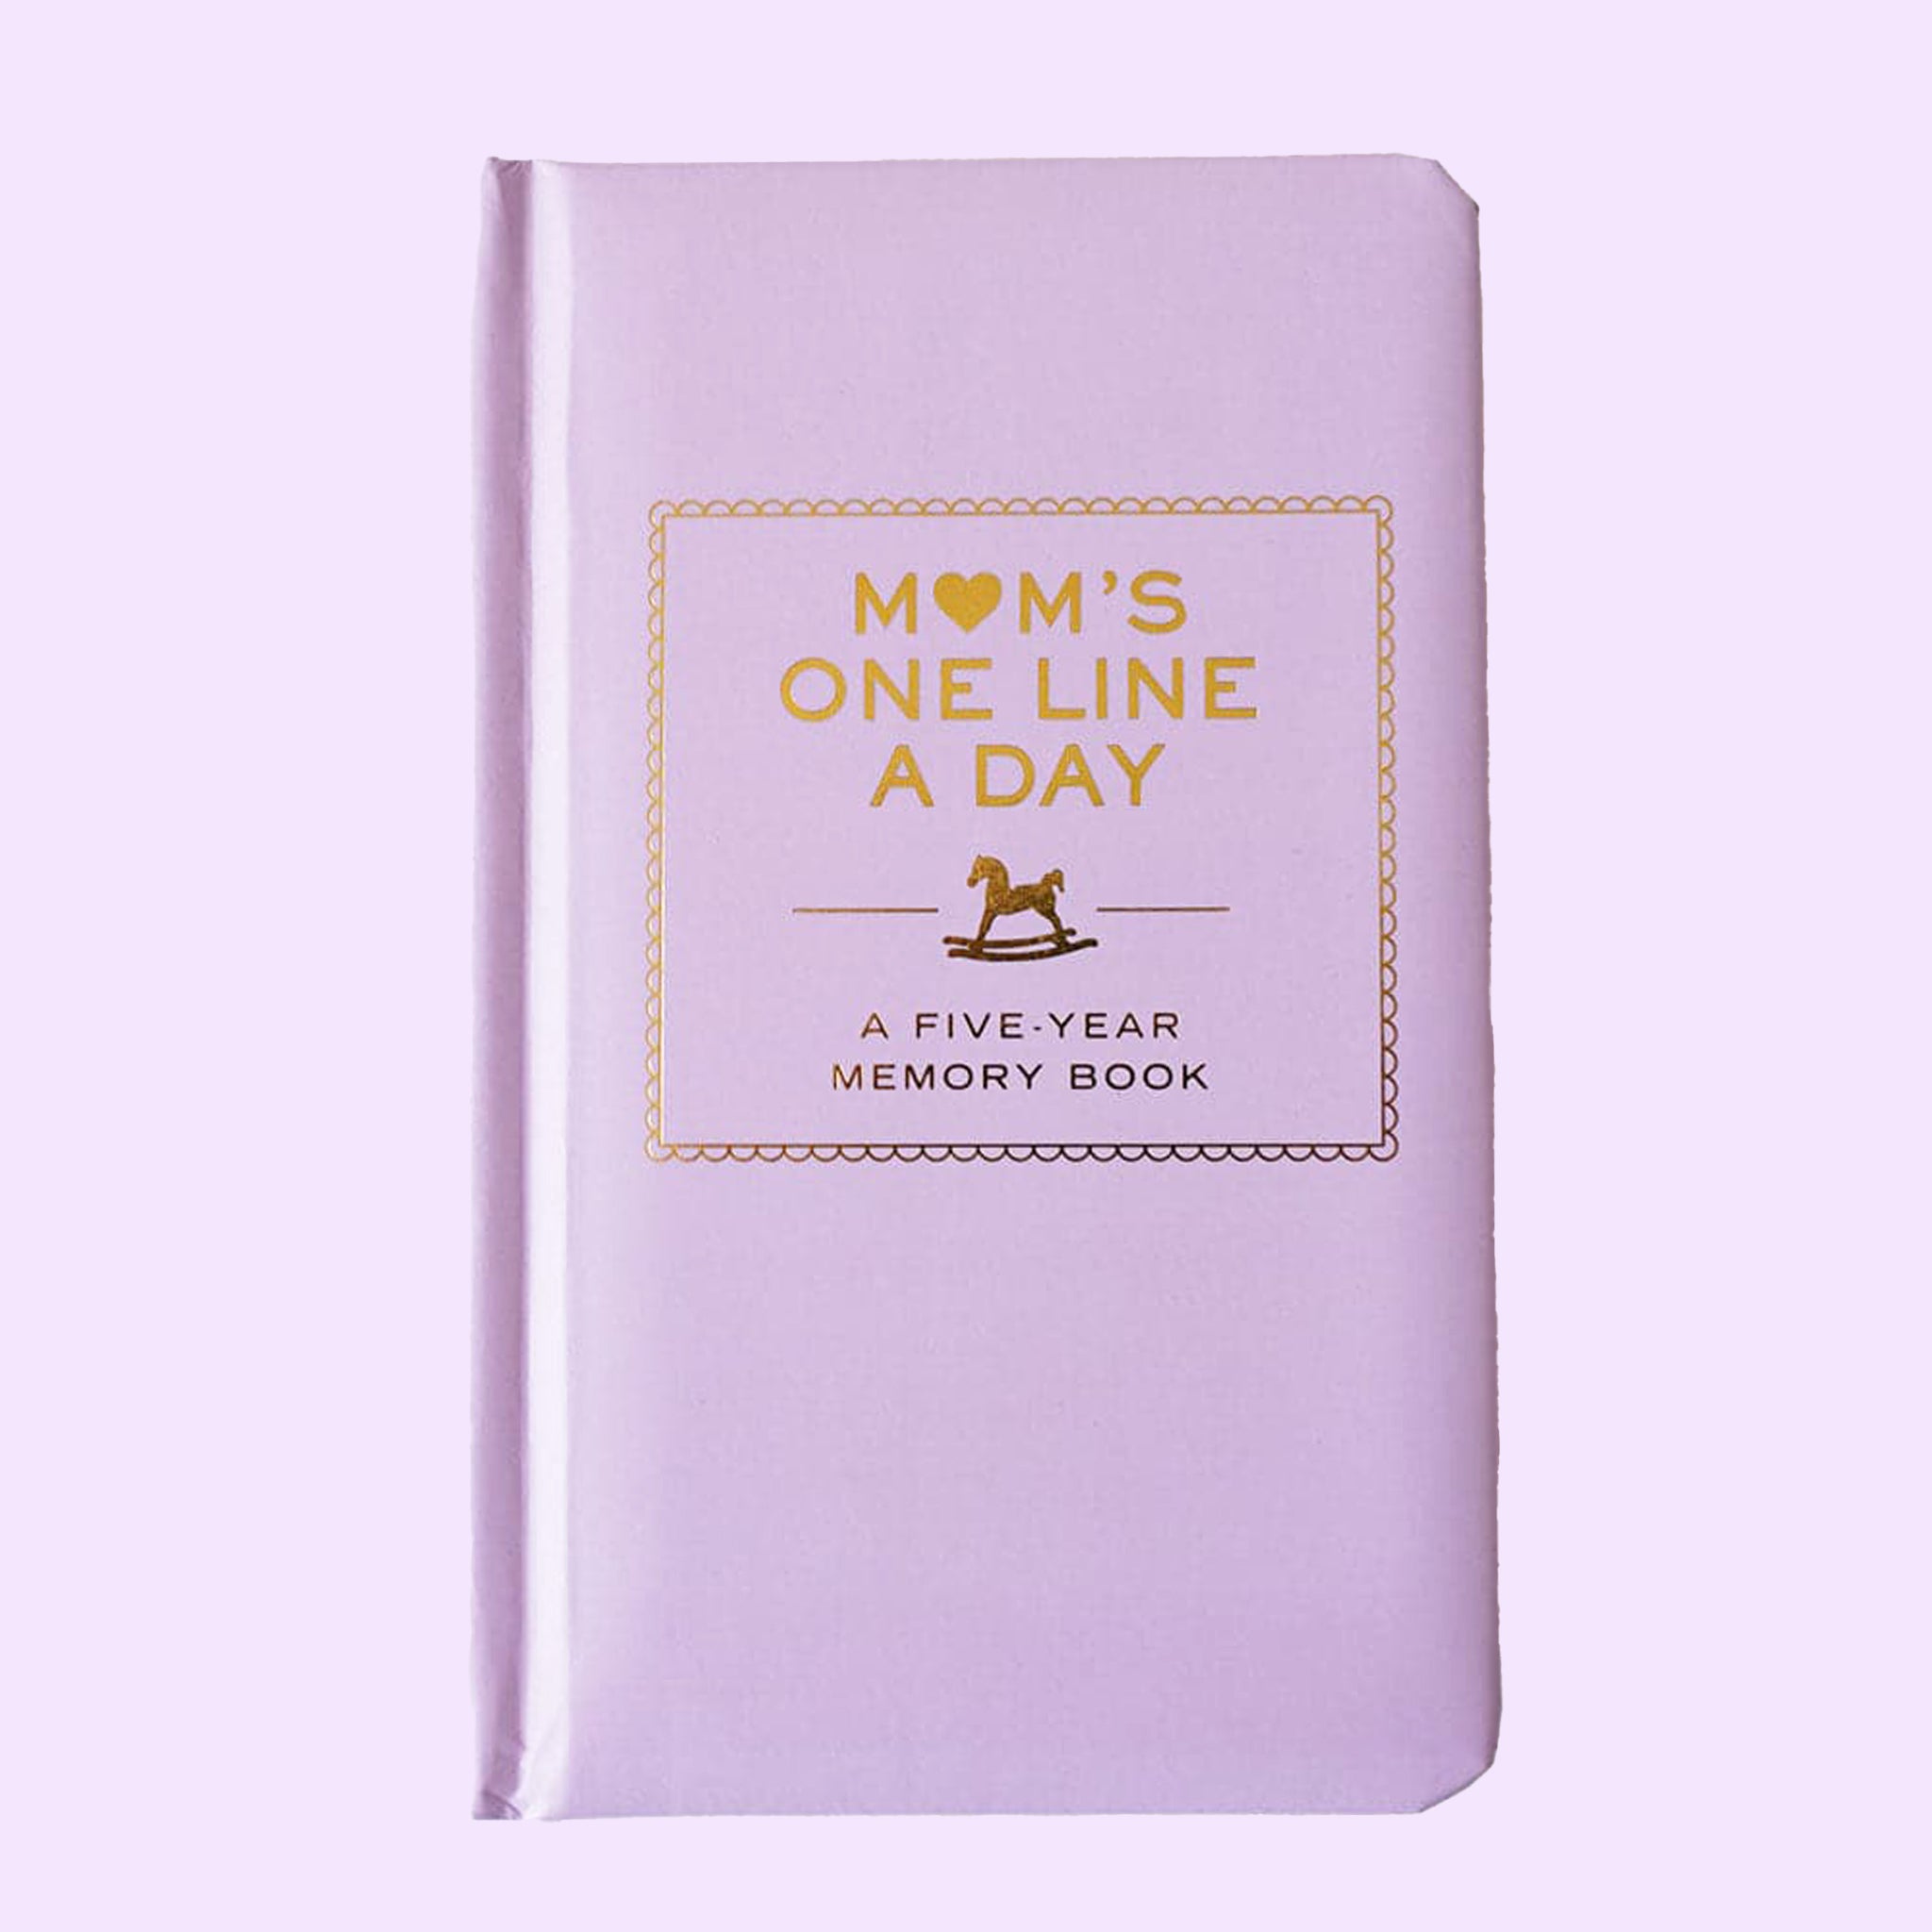 High quality, lavender memory book reading &#39;Mom&#39;s one line a day, a five-year memory book&#39; in gold foil lettering across the padded cover.